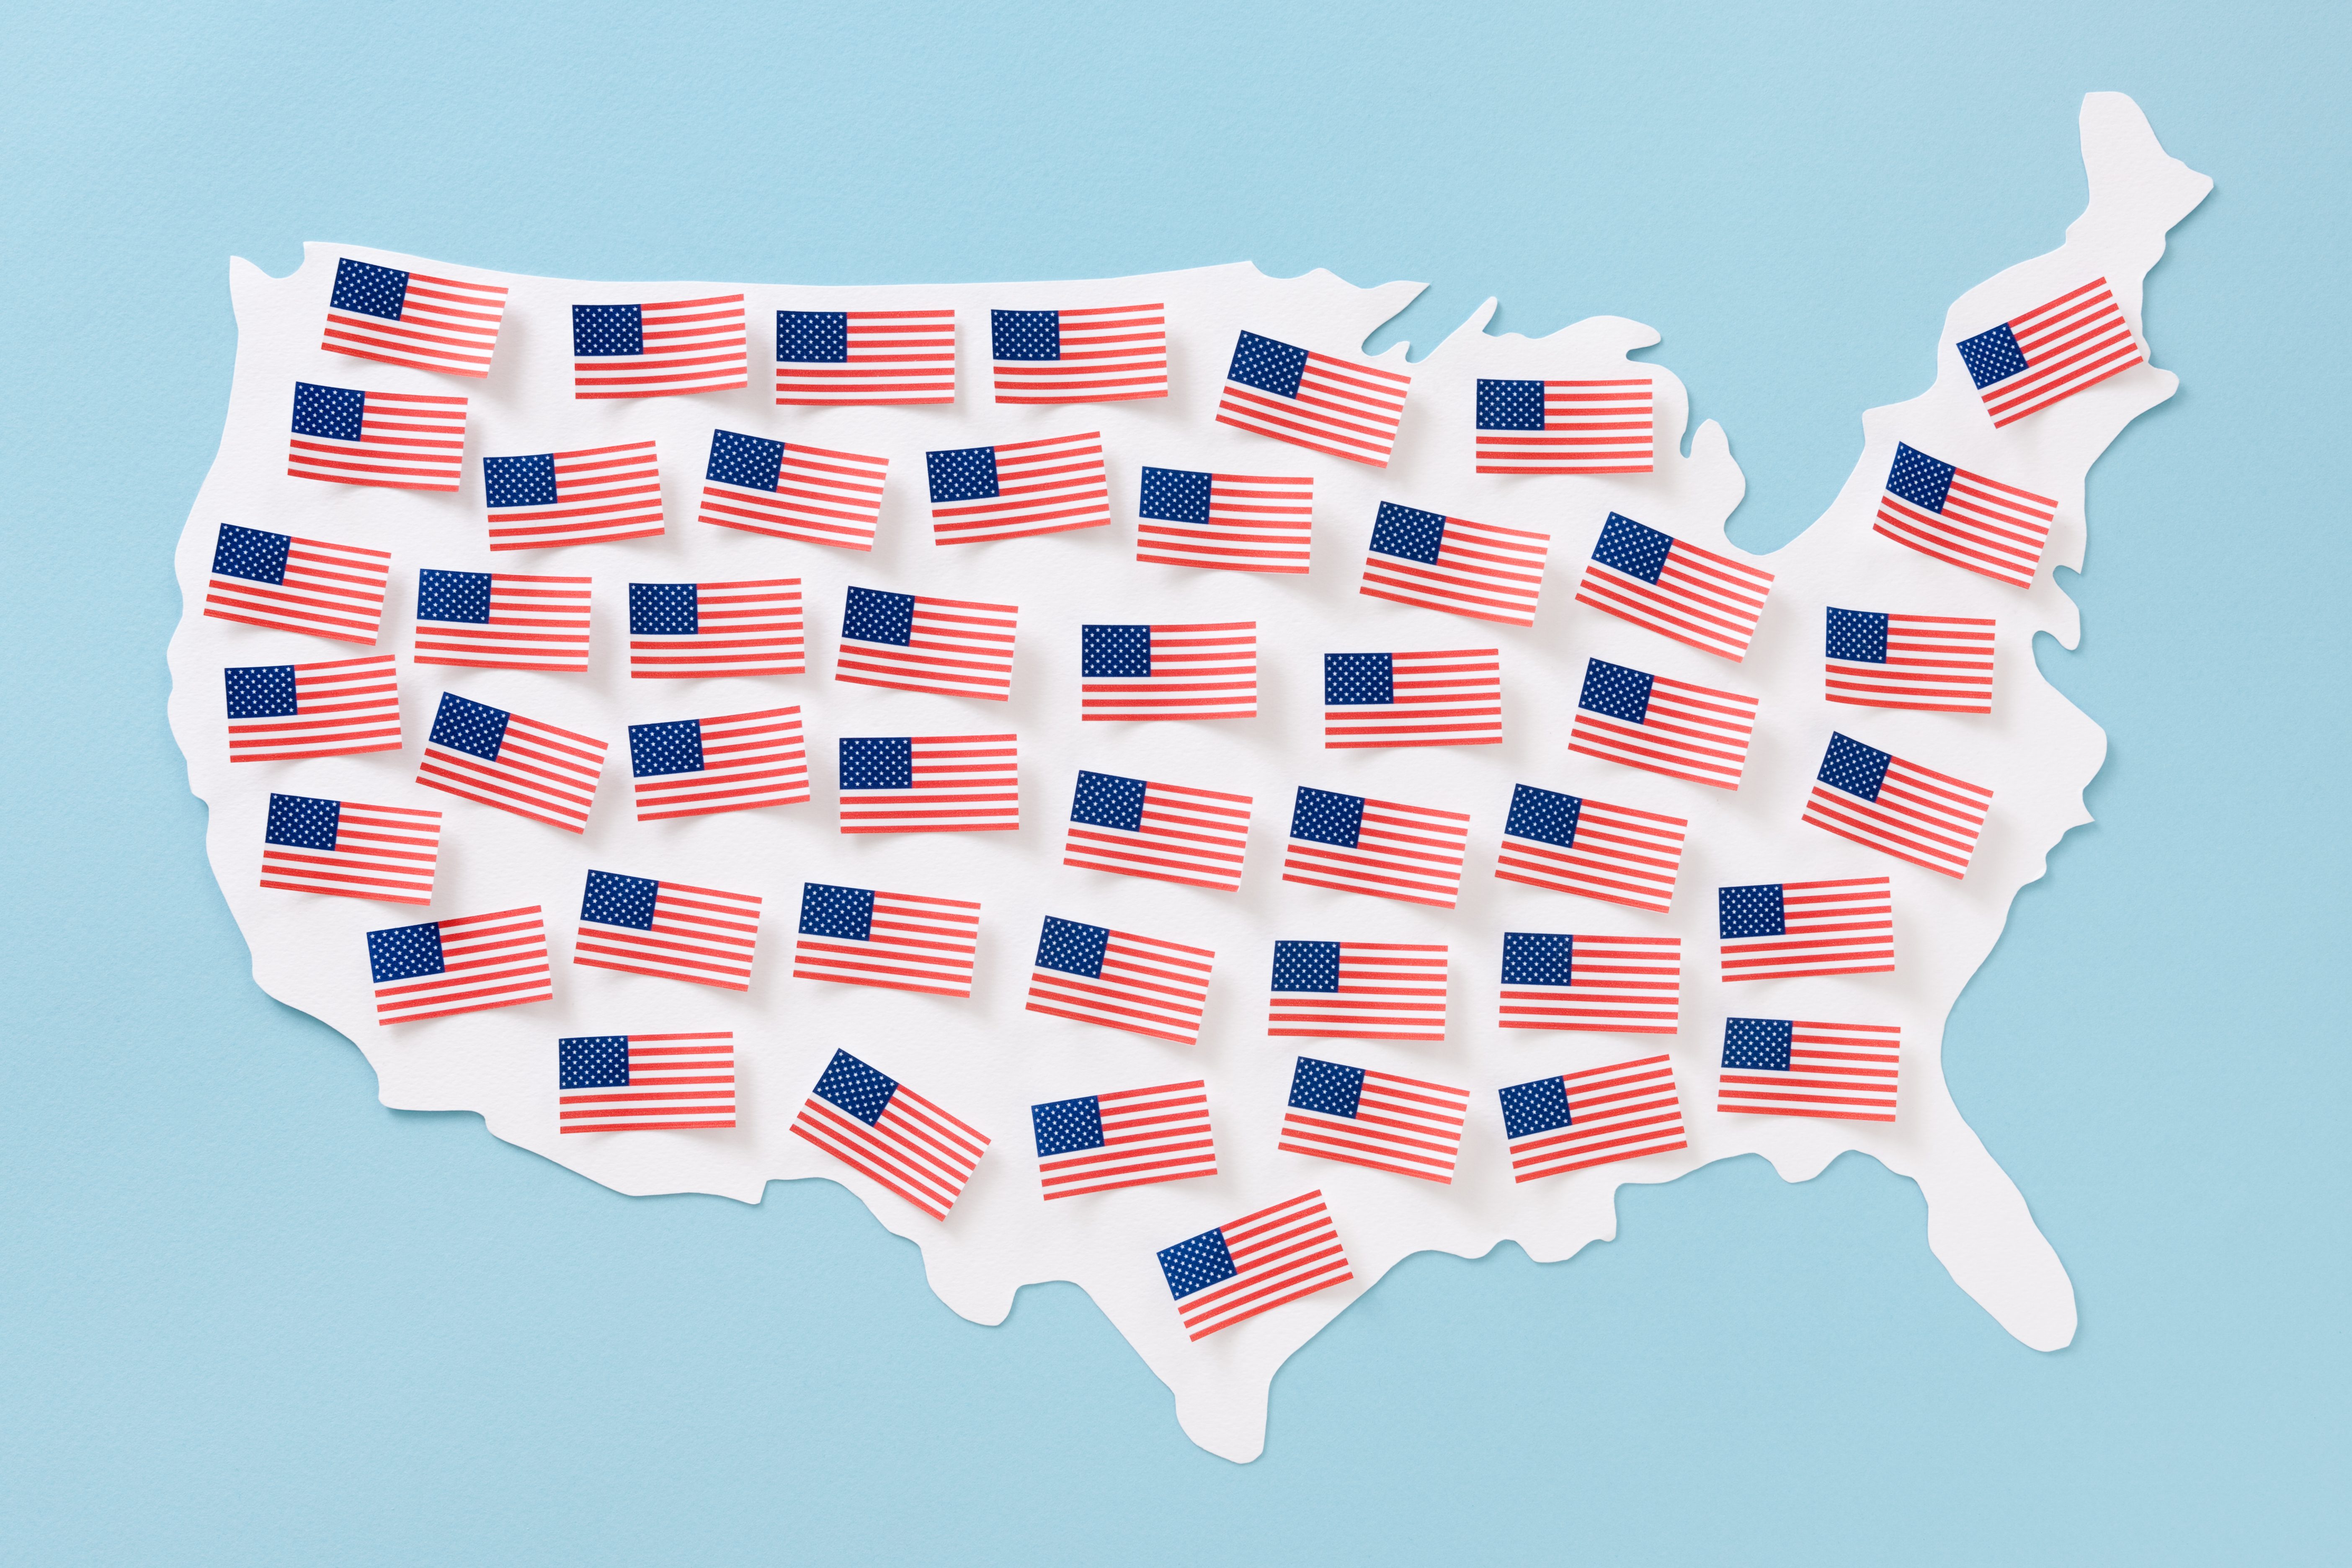 American flags over US map